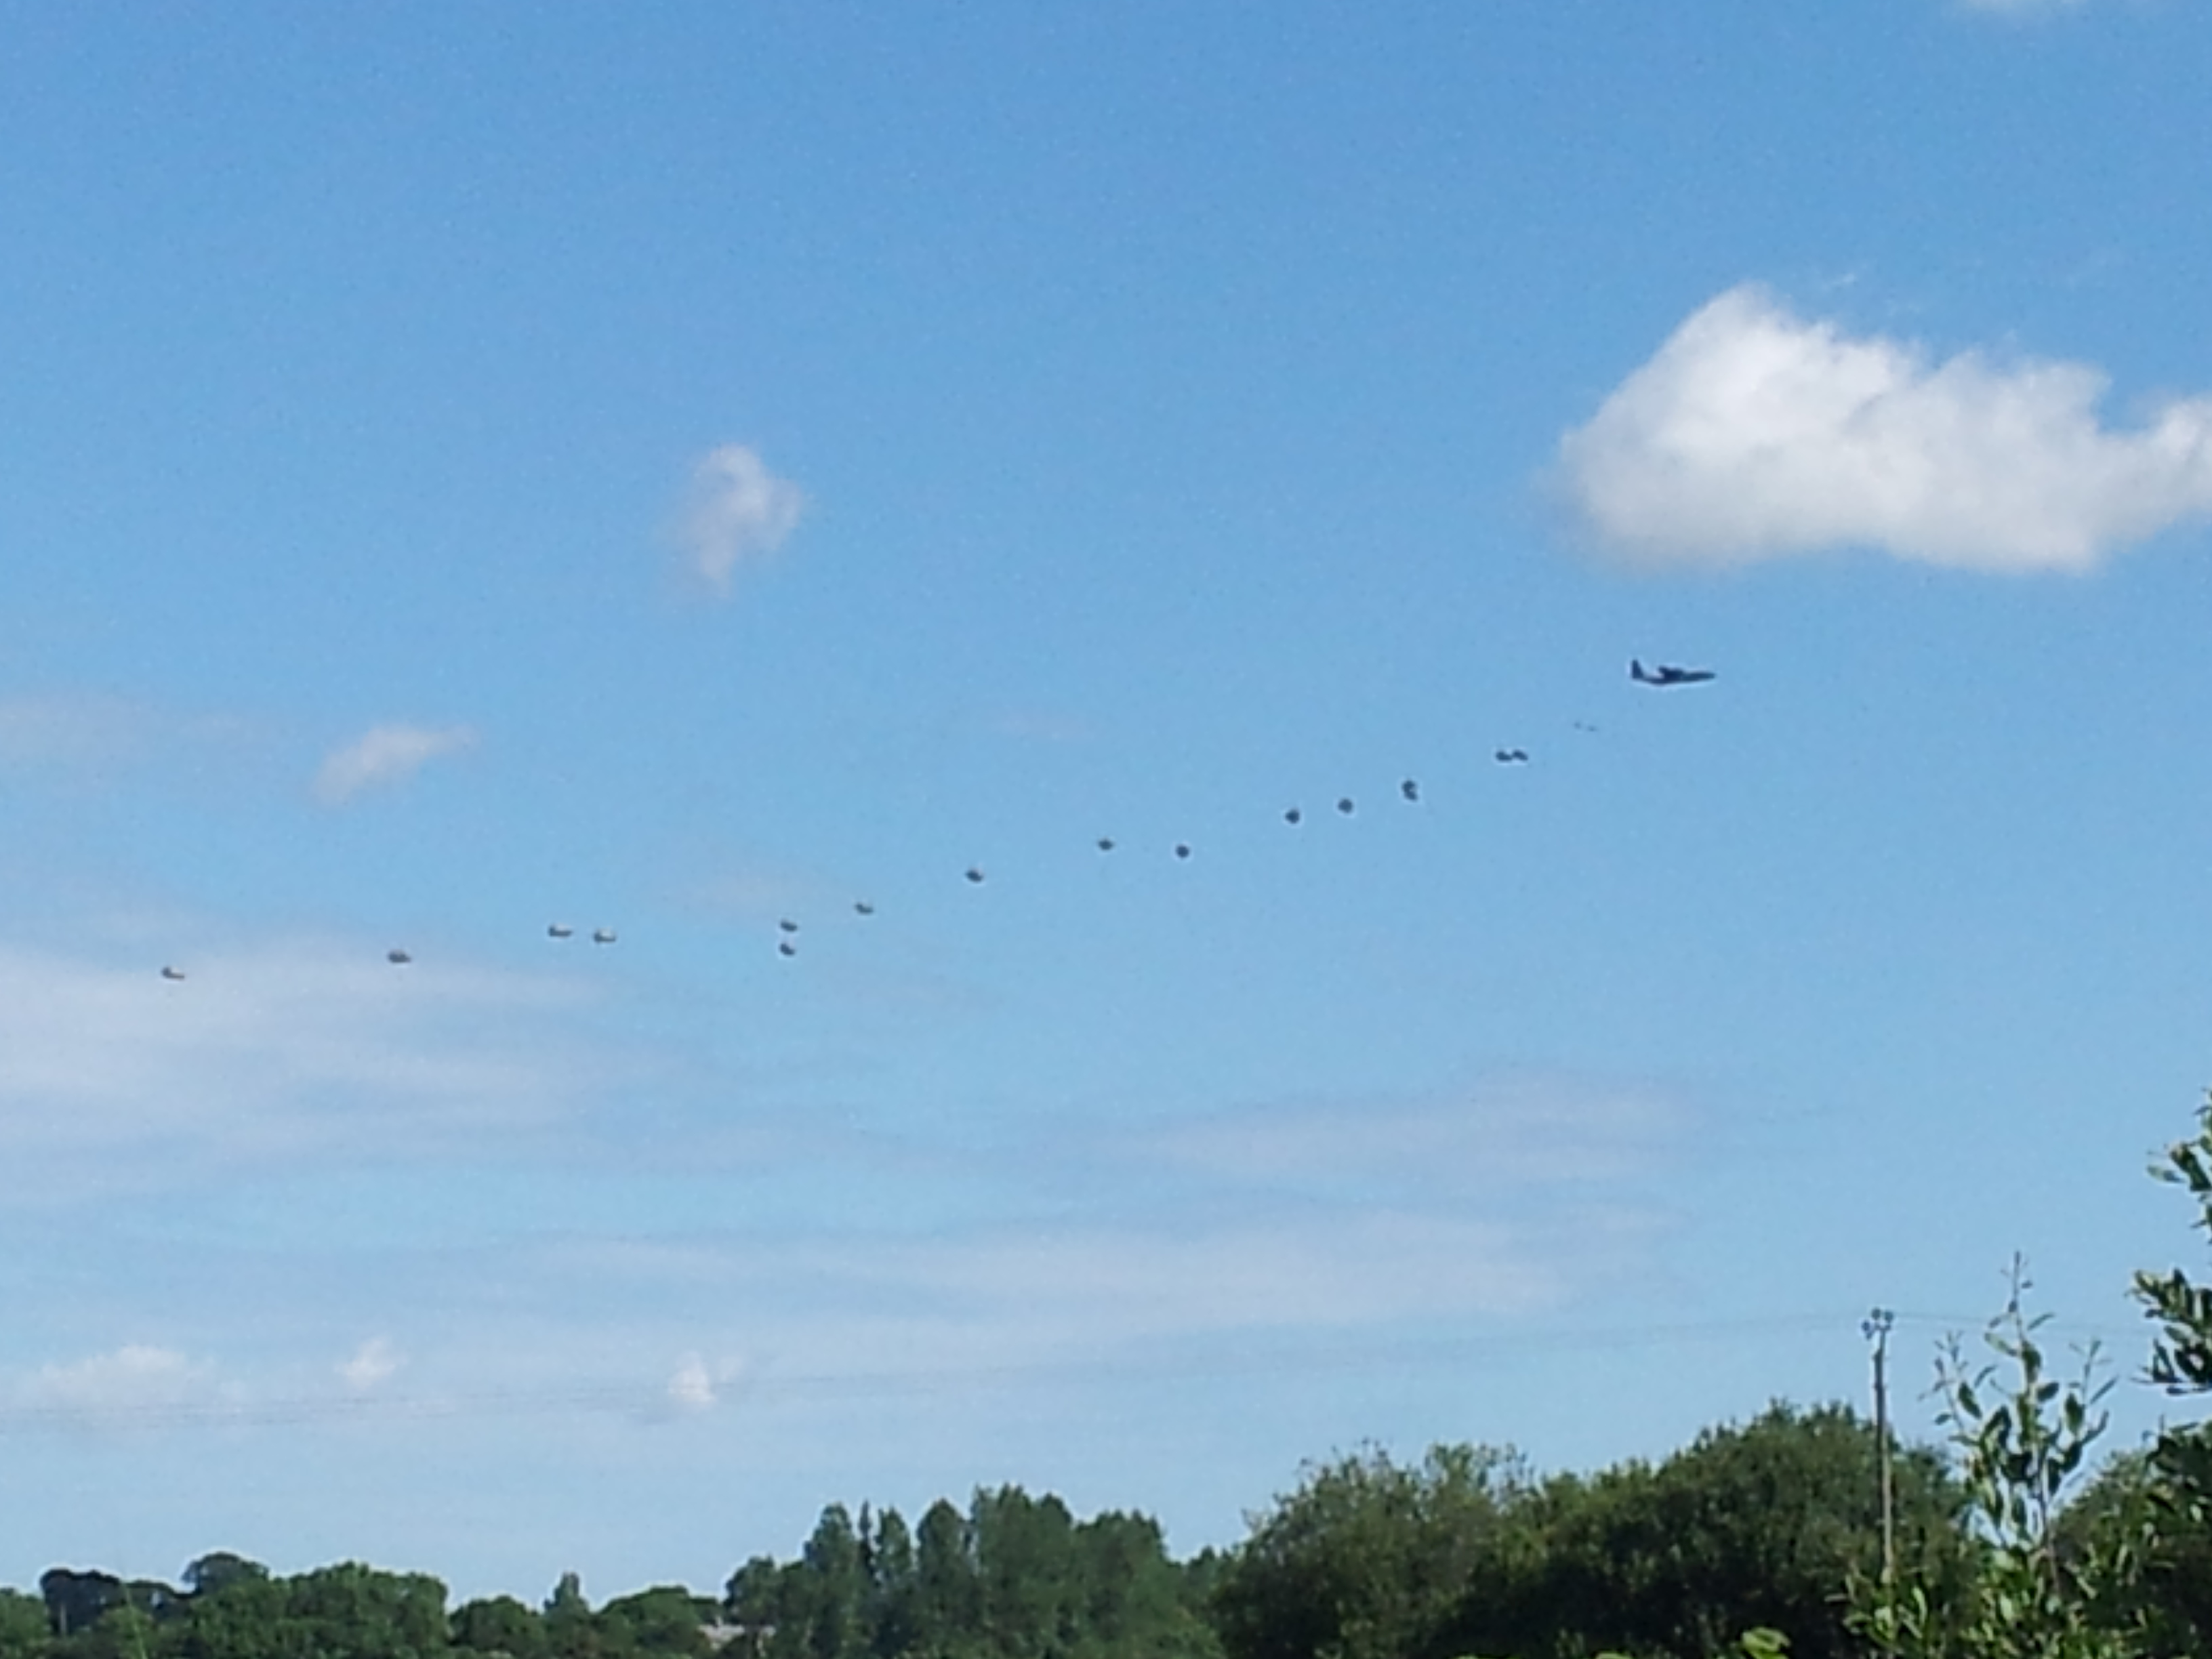 173rd dropping on 70th anniversay of D-Day, near Ste Mere Eglise.